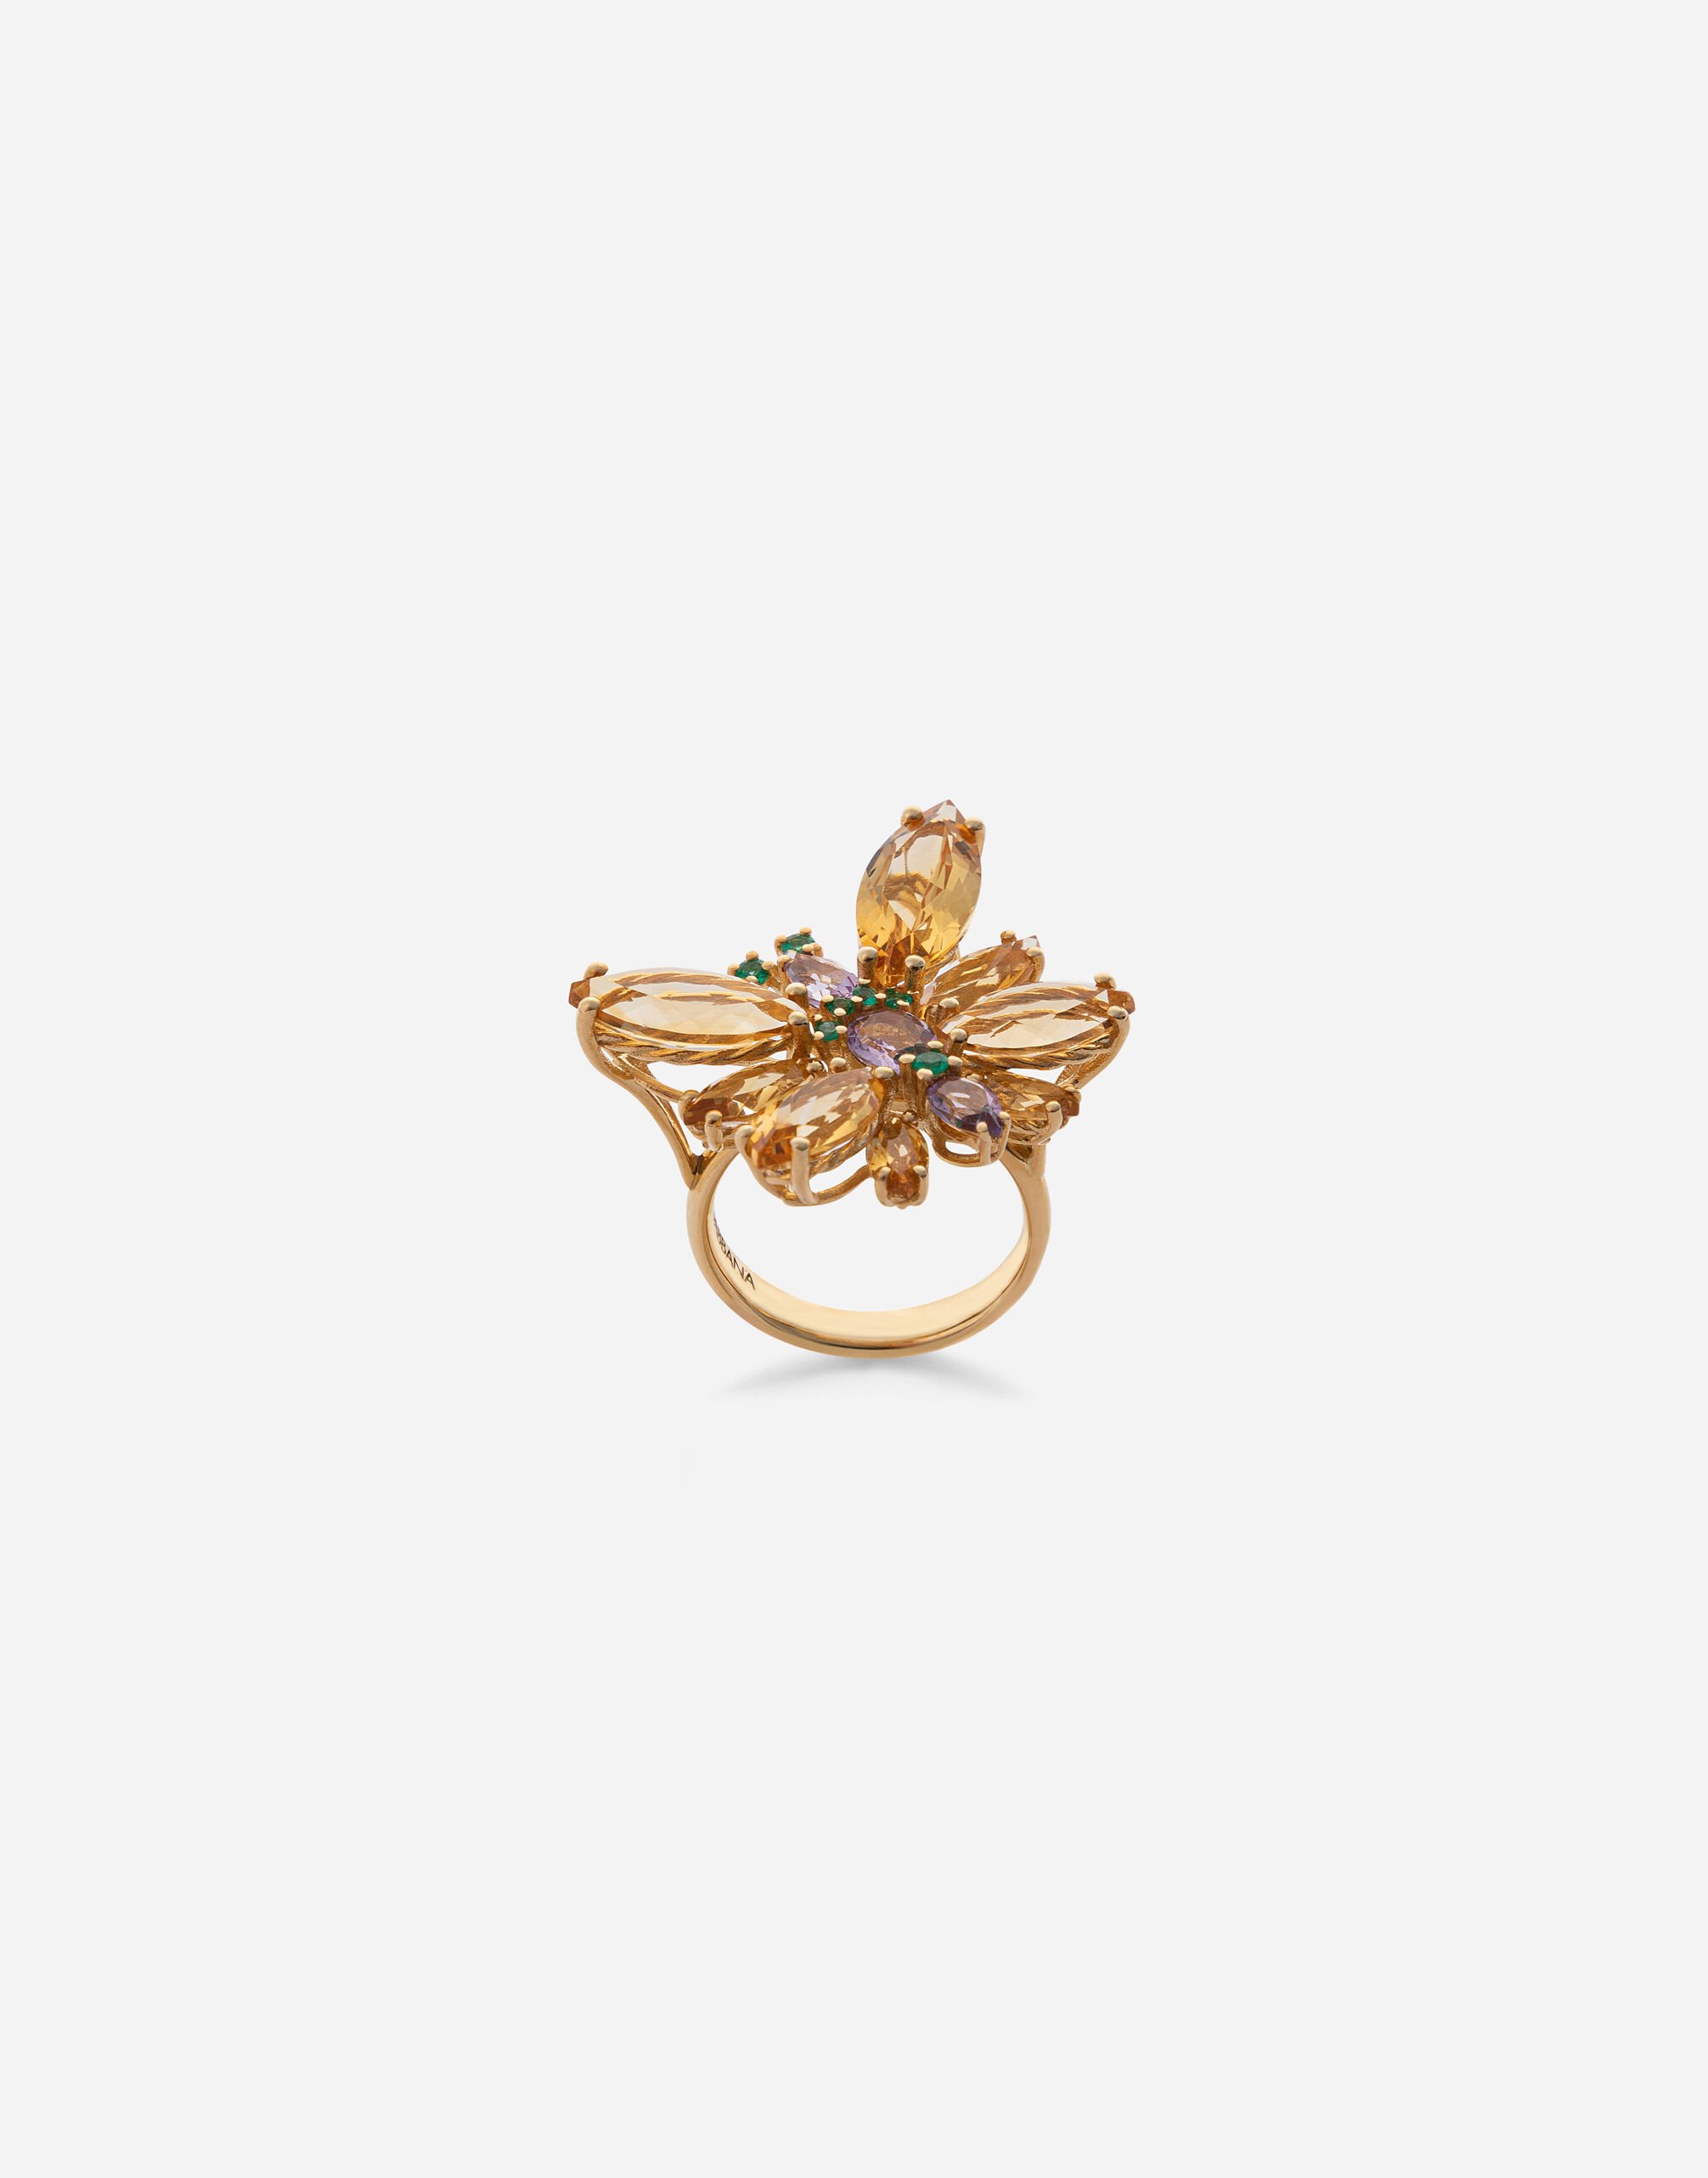 Dolce & Gabbana Spring ring in yellow 18kt gold with citrine butterfly Gold WRMR1GWMIXU